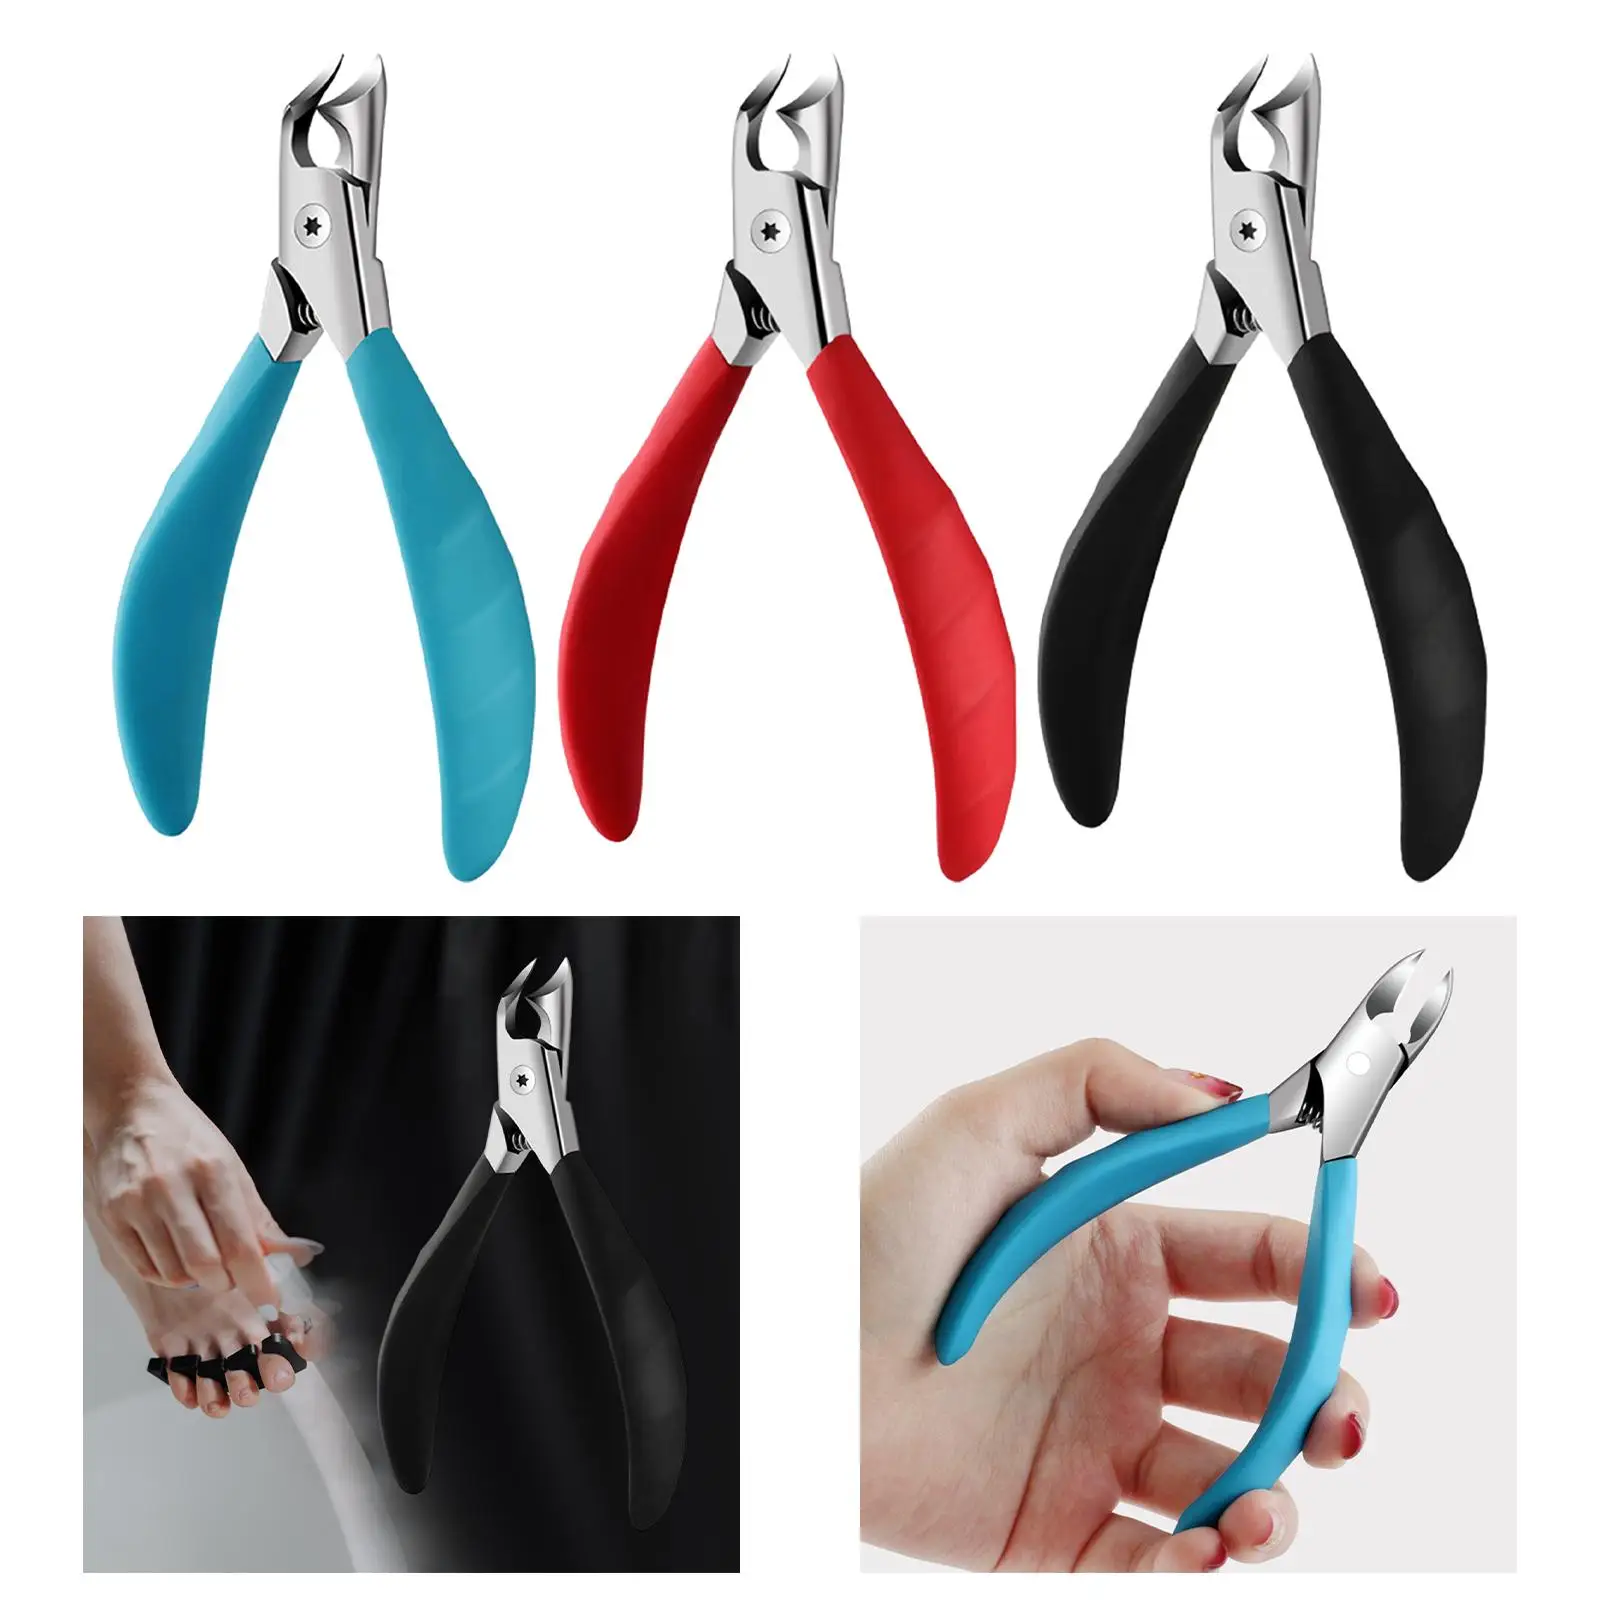 Toenail Clippers with Spring Precision Scissors Curved Nonslip Handle Thick Nails Cutter for Ingrown Toenail Treatment Home SPA